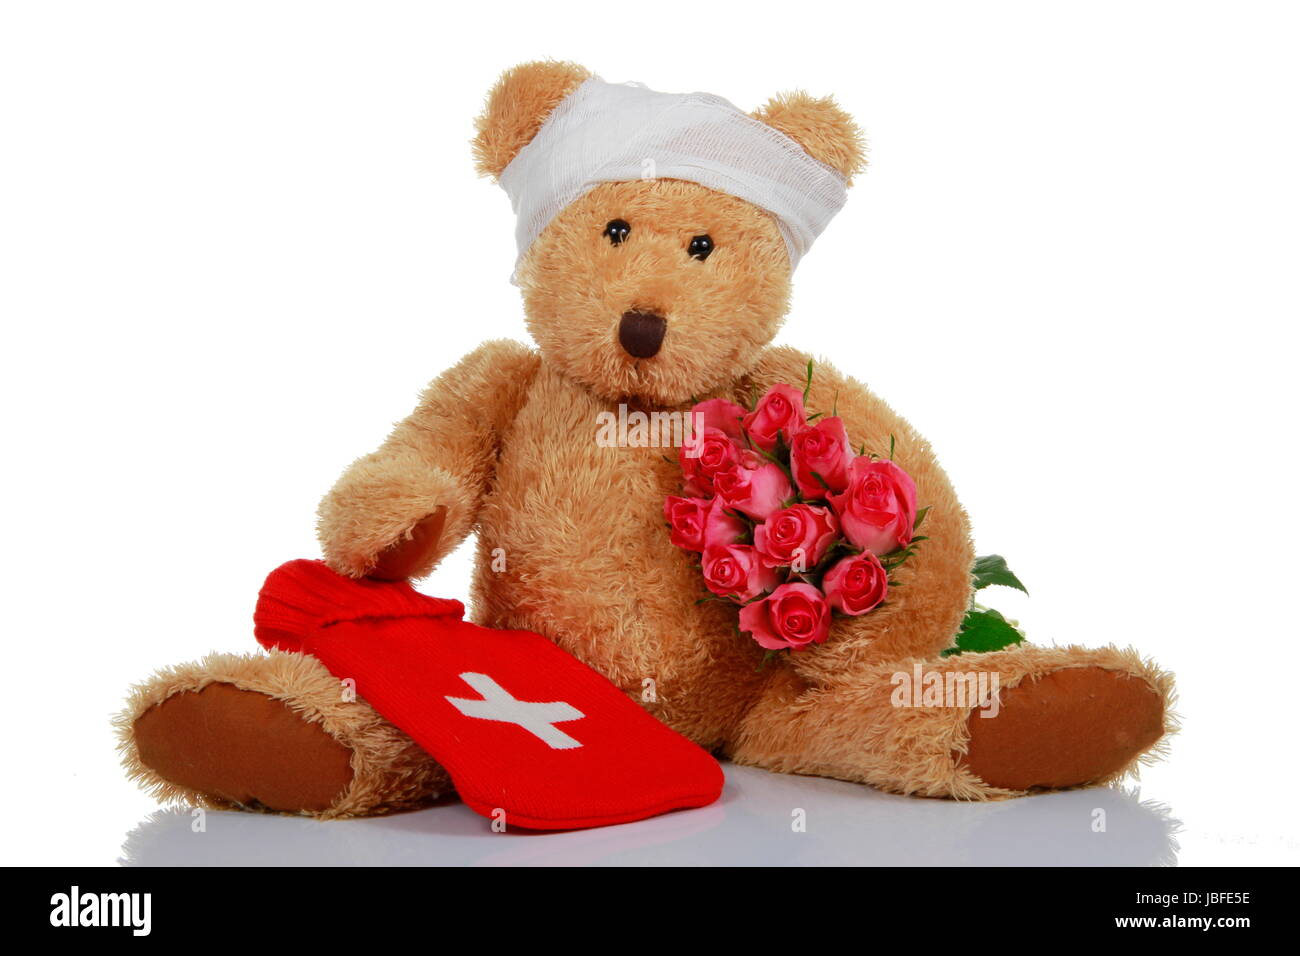 teddy bear with roses and hot water bottle Stock Photo